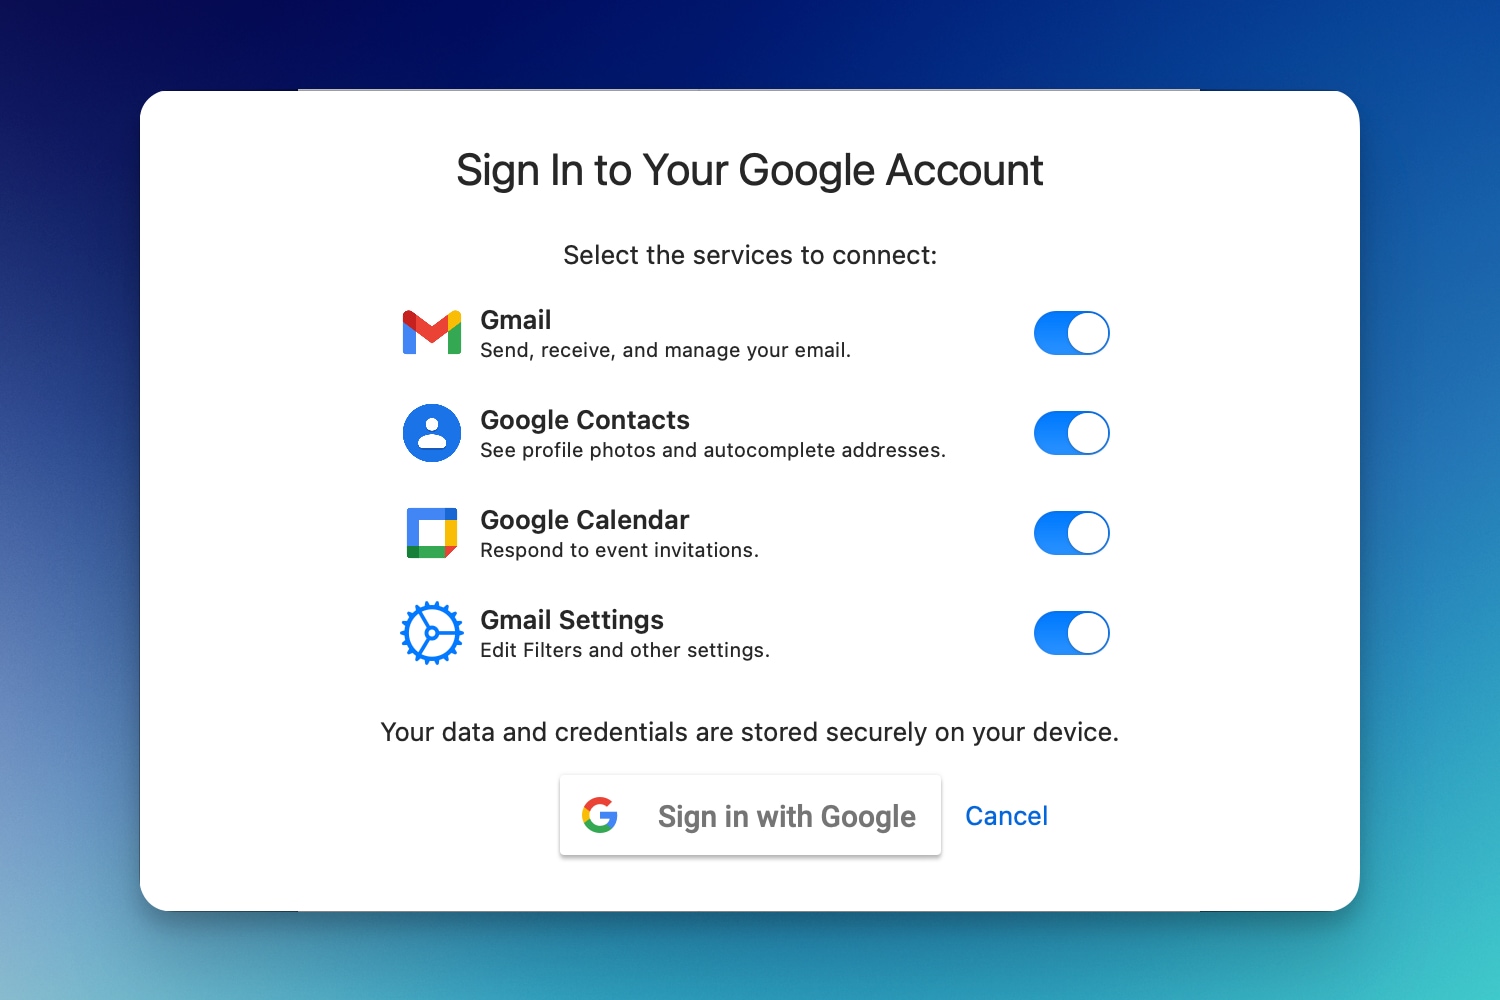 Sign In With Google